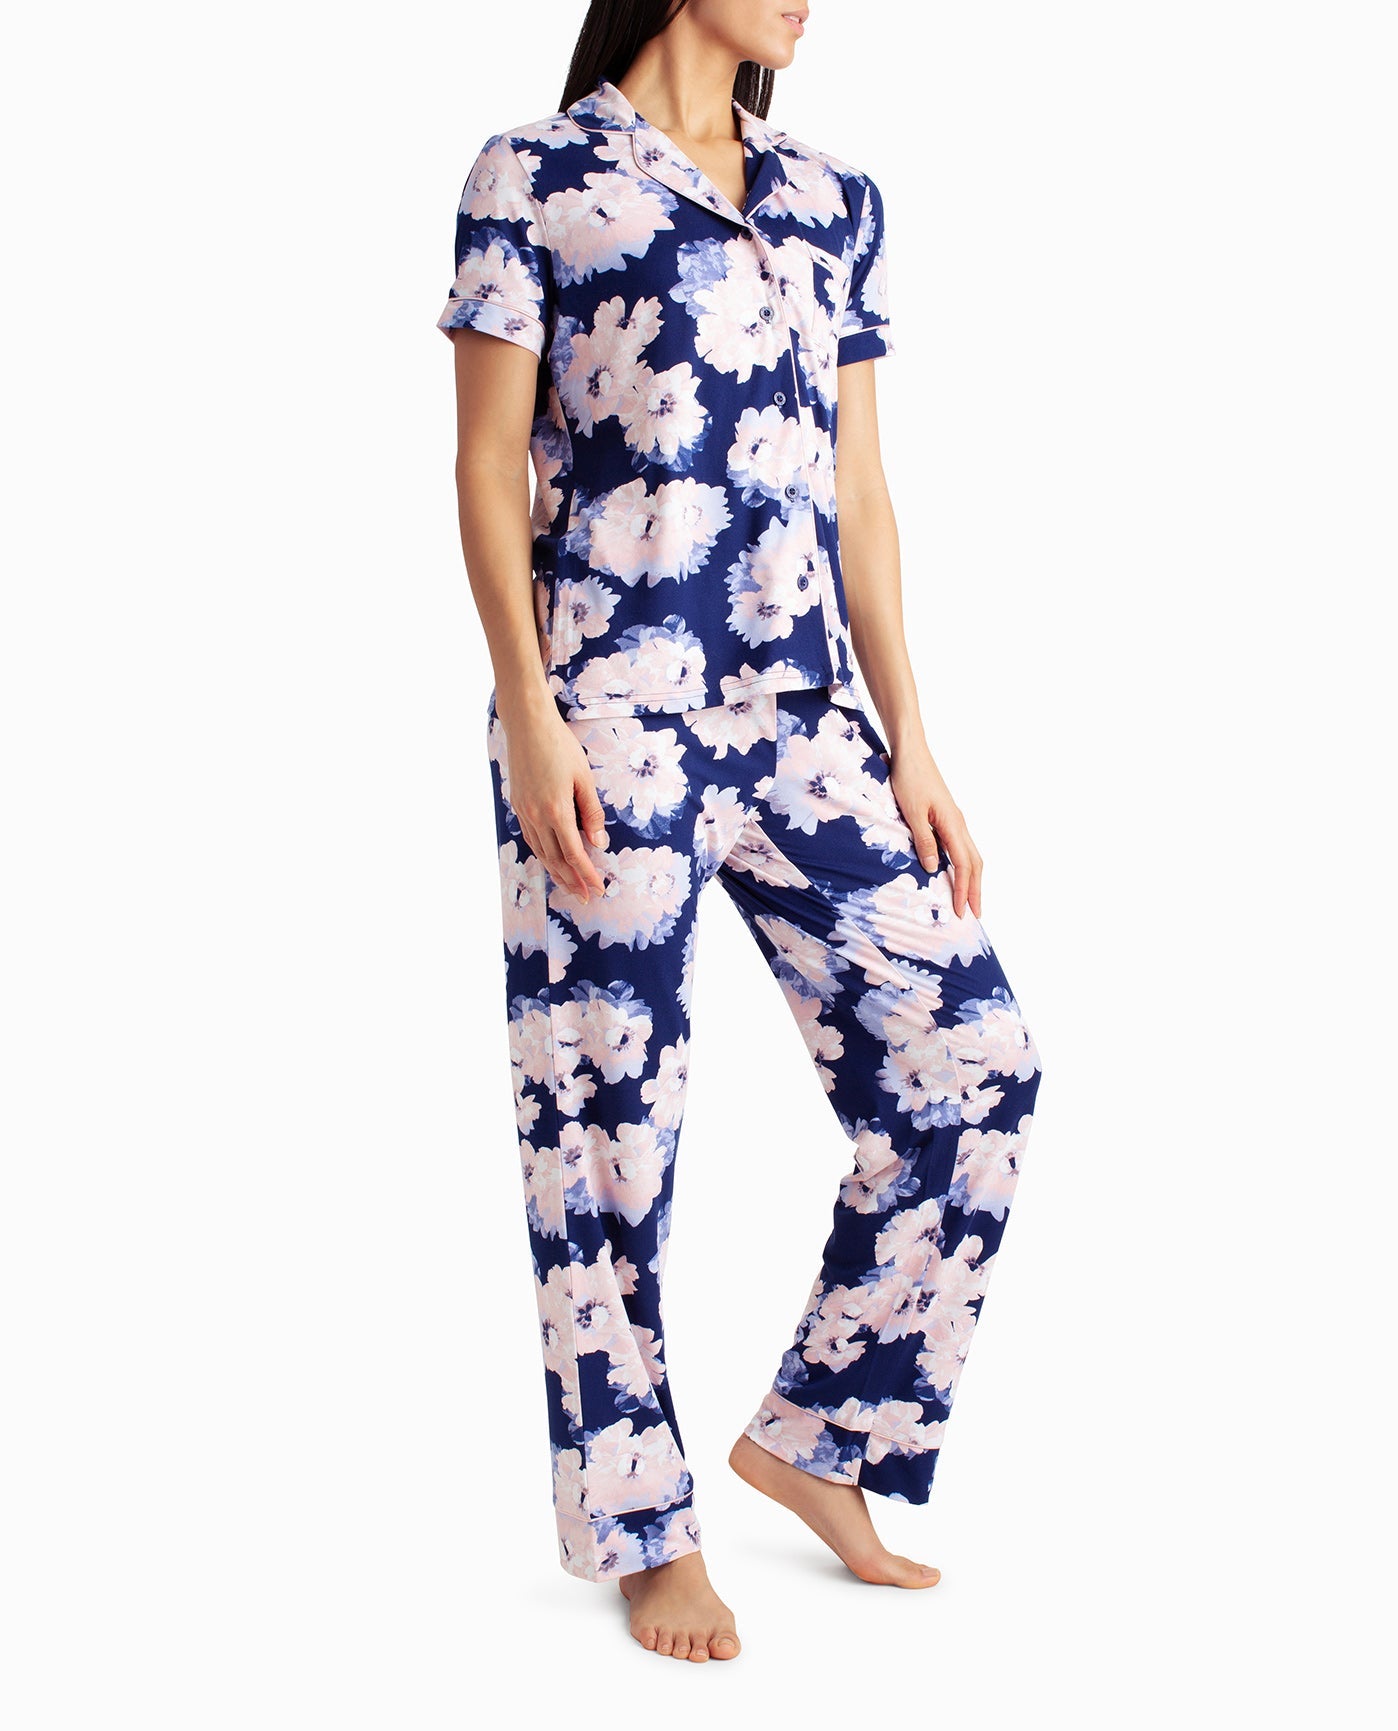 SIDE OF PEACHED JERSEY SHIRT AND PANT TWO-PIECE SLEEPWEAR SET | Indiglo Floral